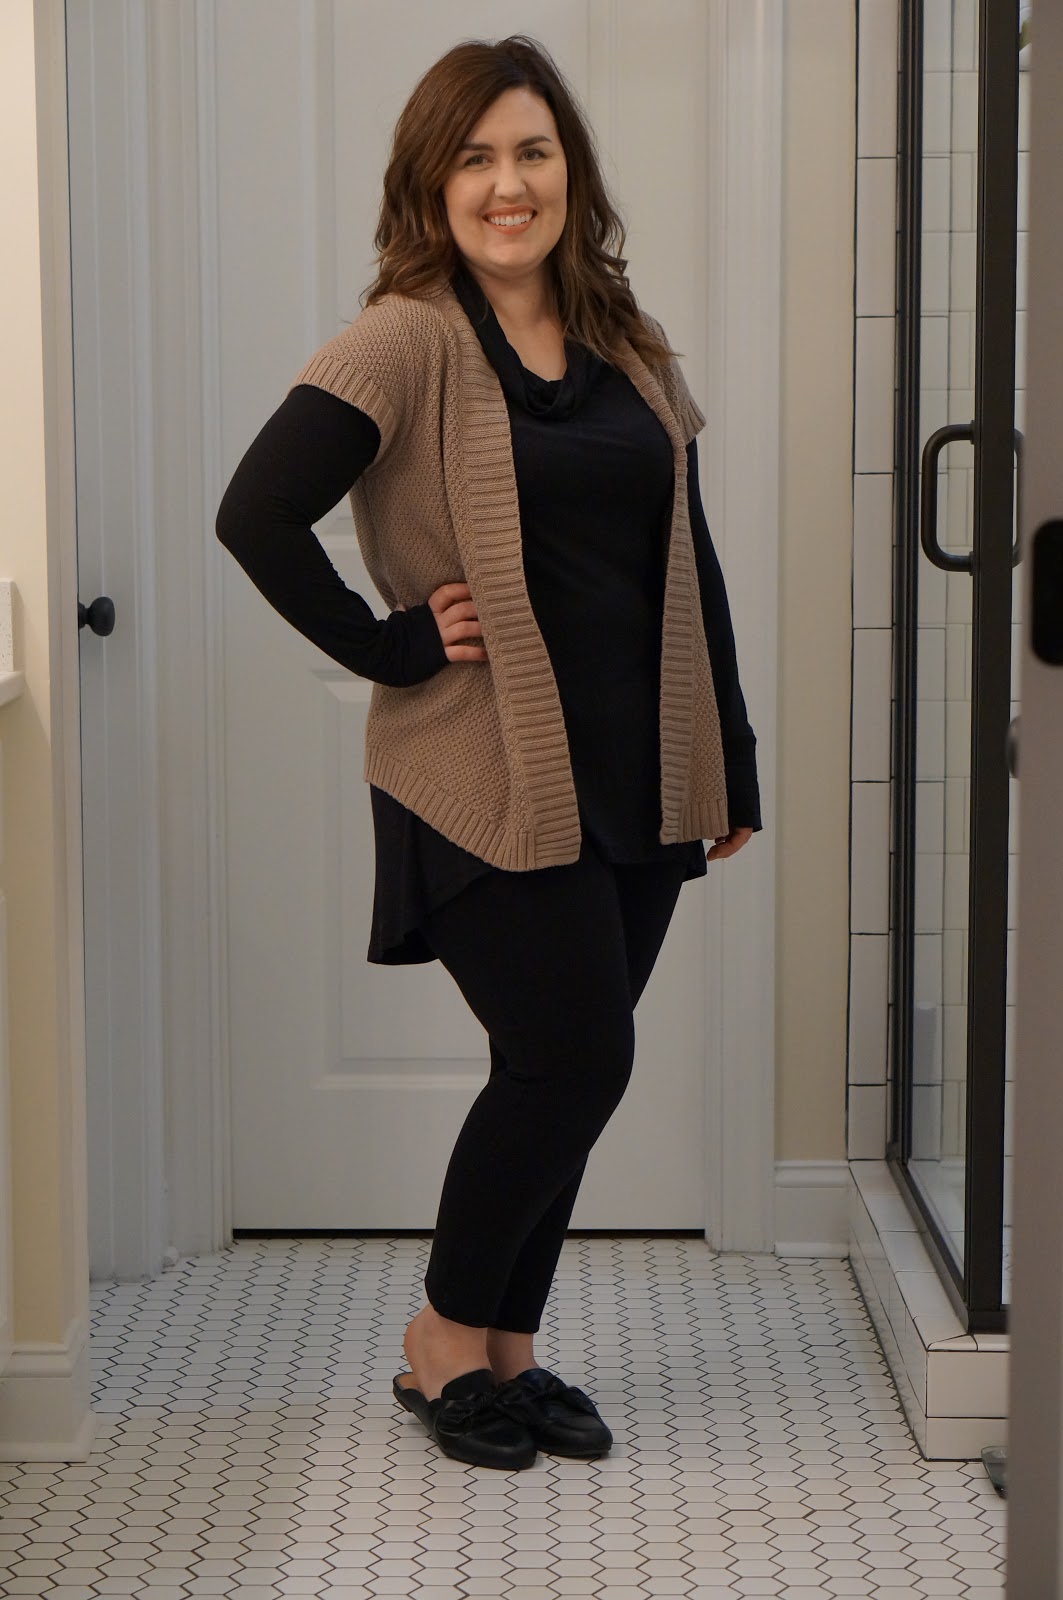 Rebecca Lately Thrifted Fashion Taupe and Black Outfit Mule Bow Flats